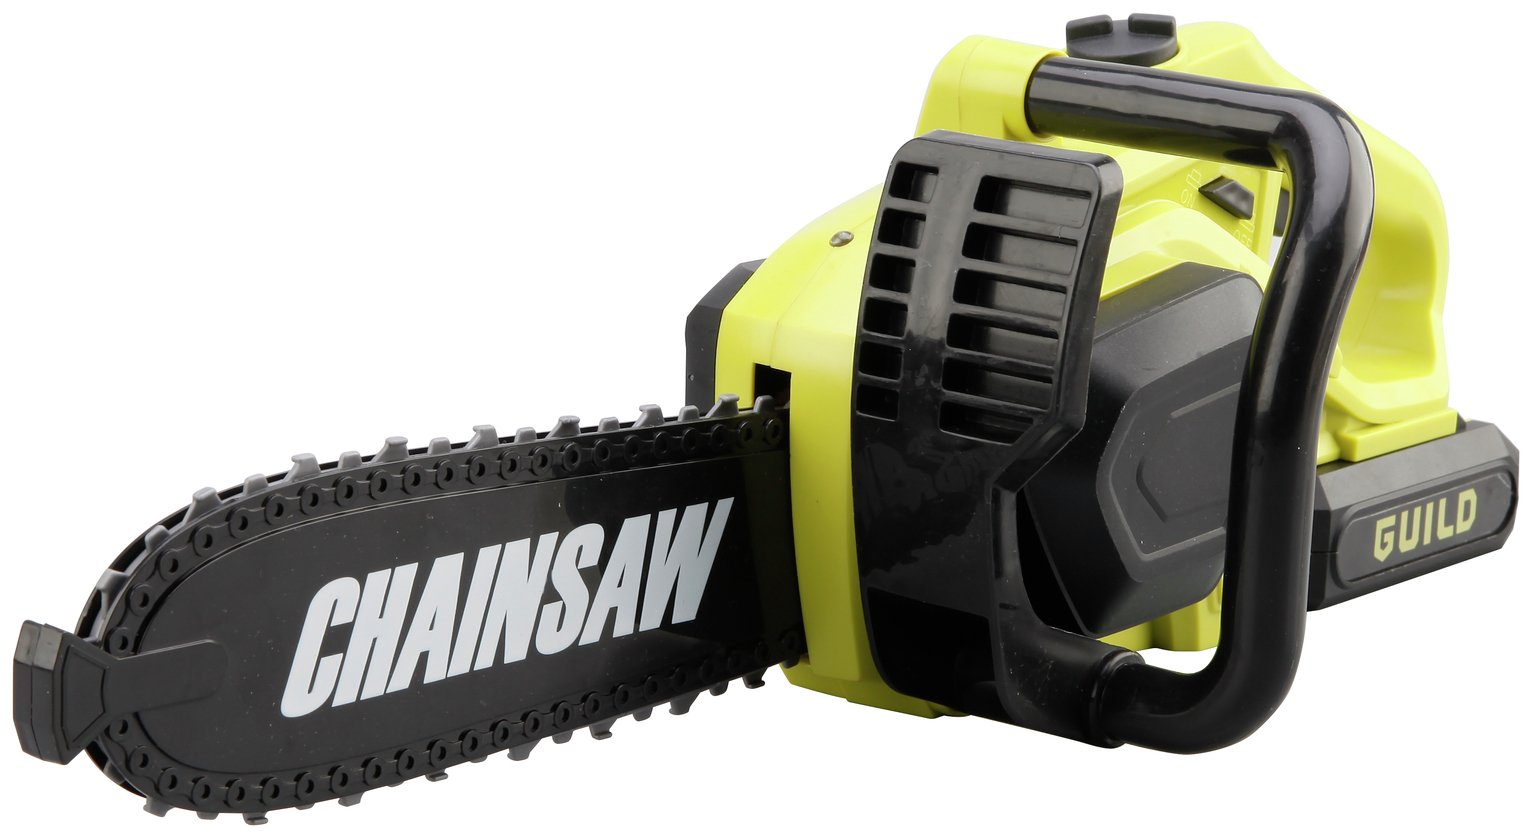 Chad Valley DIY Chainsaw review